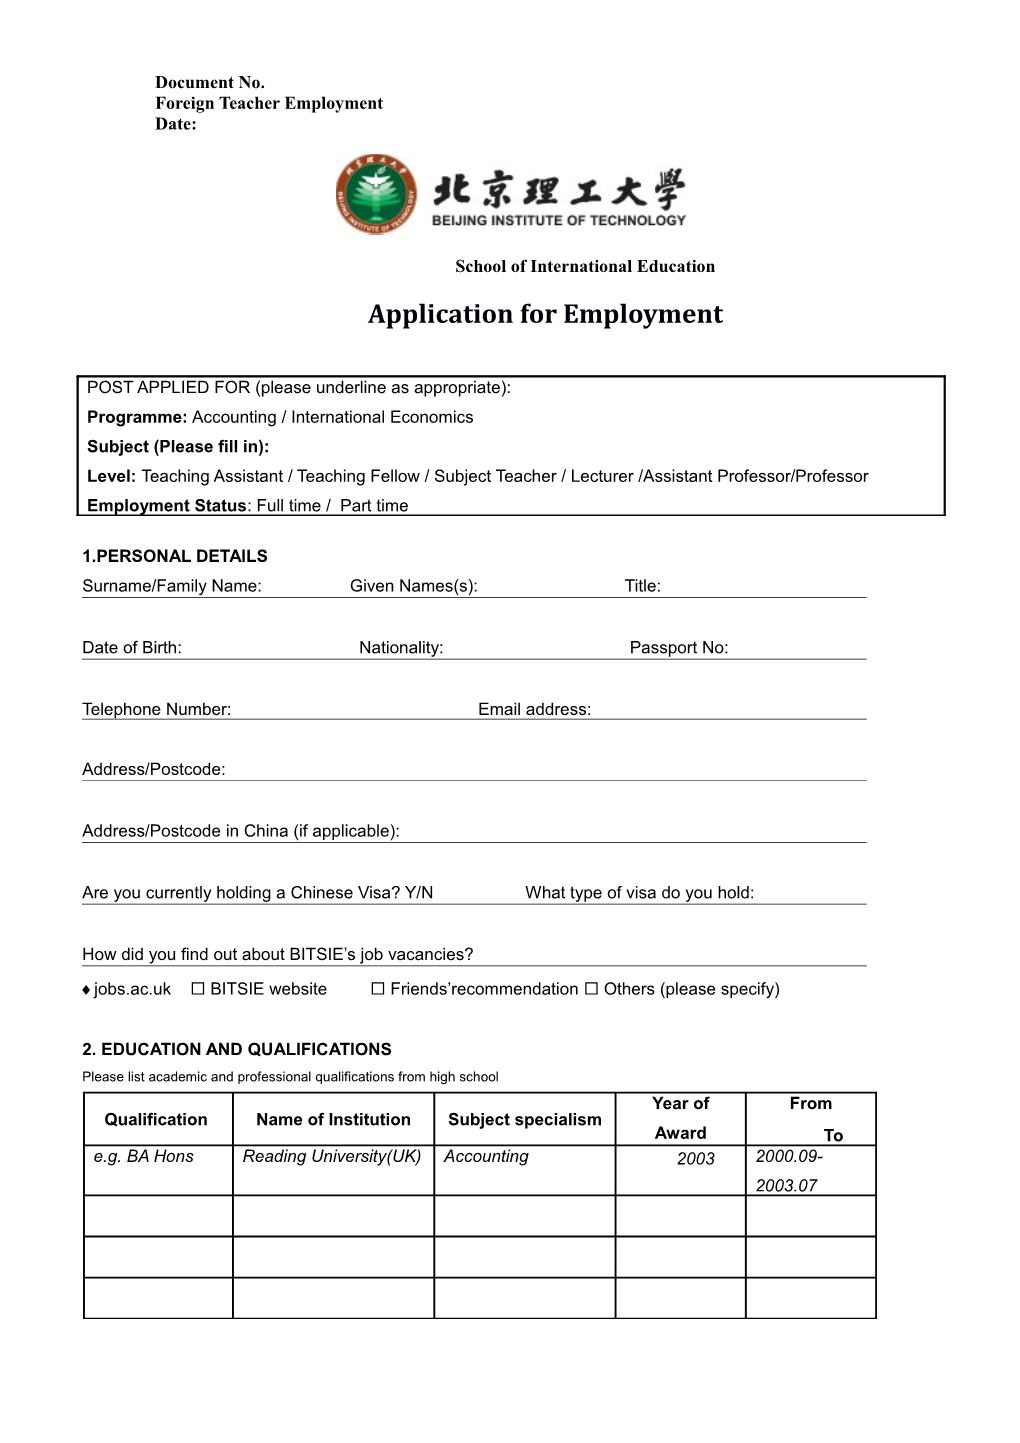 Application for Employment s45